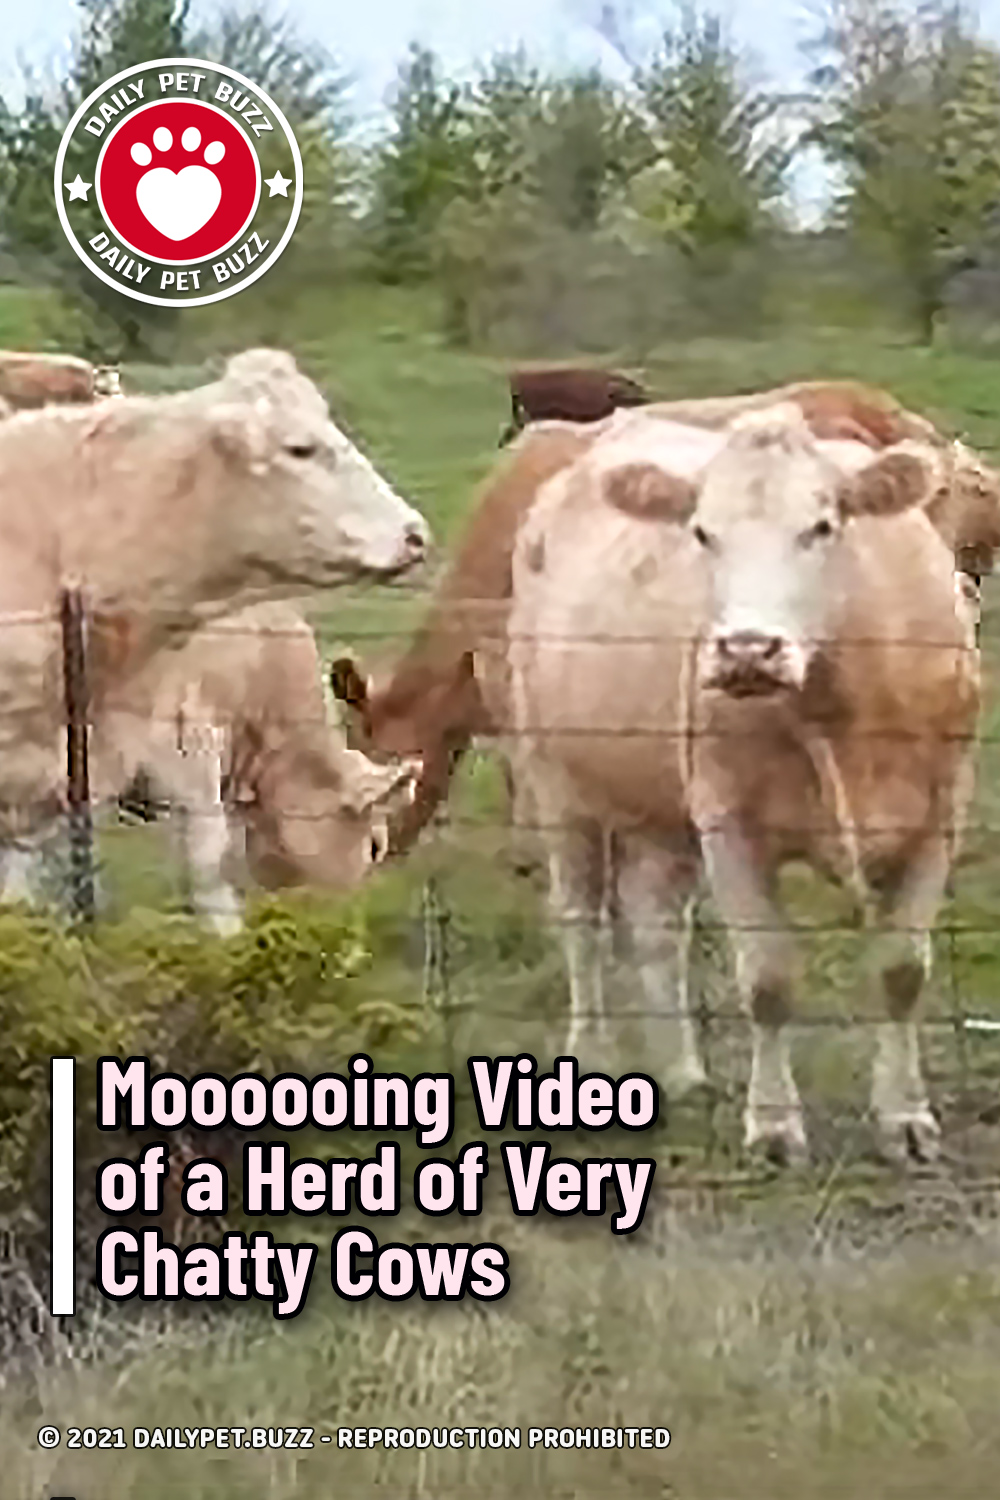 Moooooing Video of a Herd of Very Chatty Cows